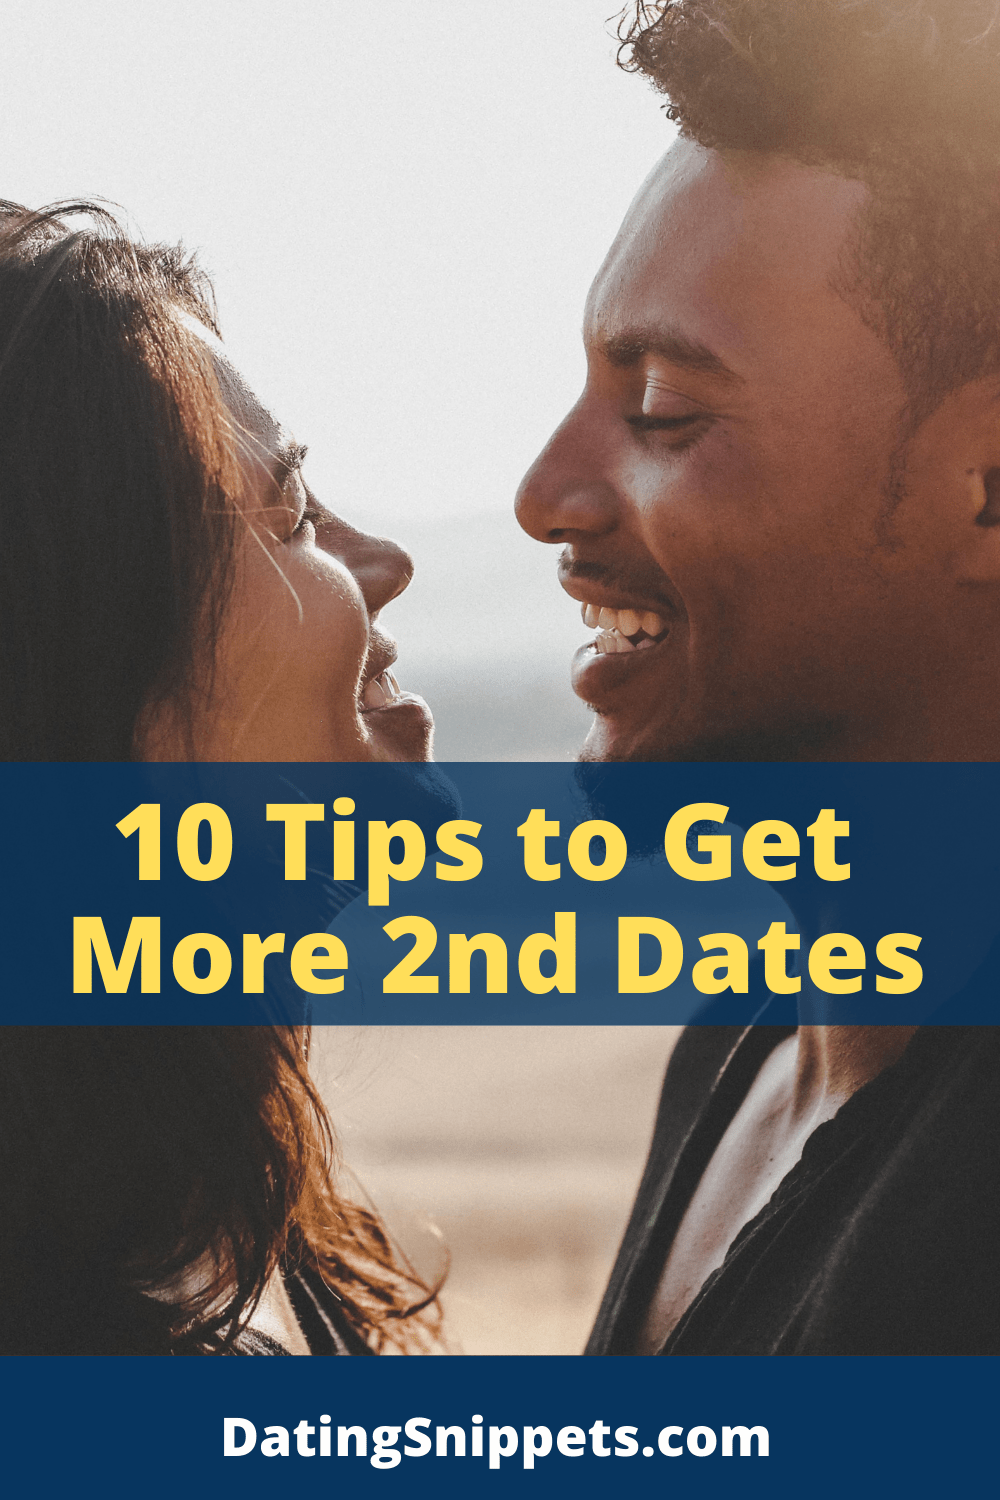 10 tips to get more dates and get more second dates from dating snippets